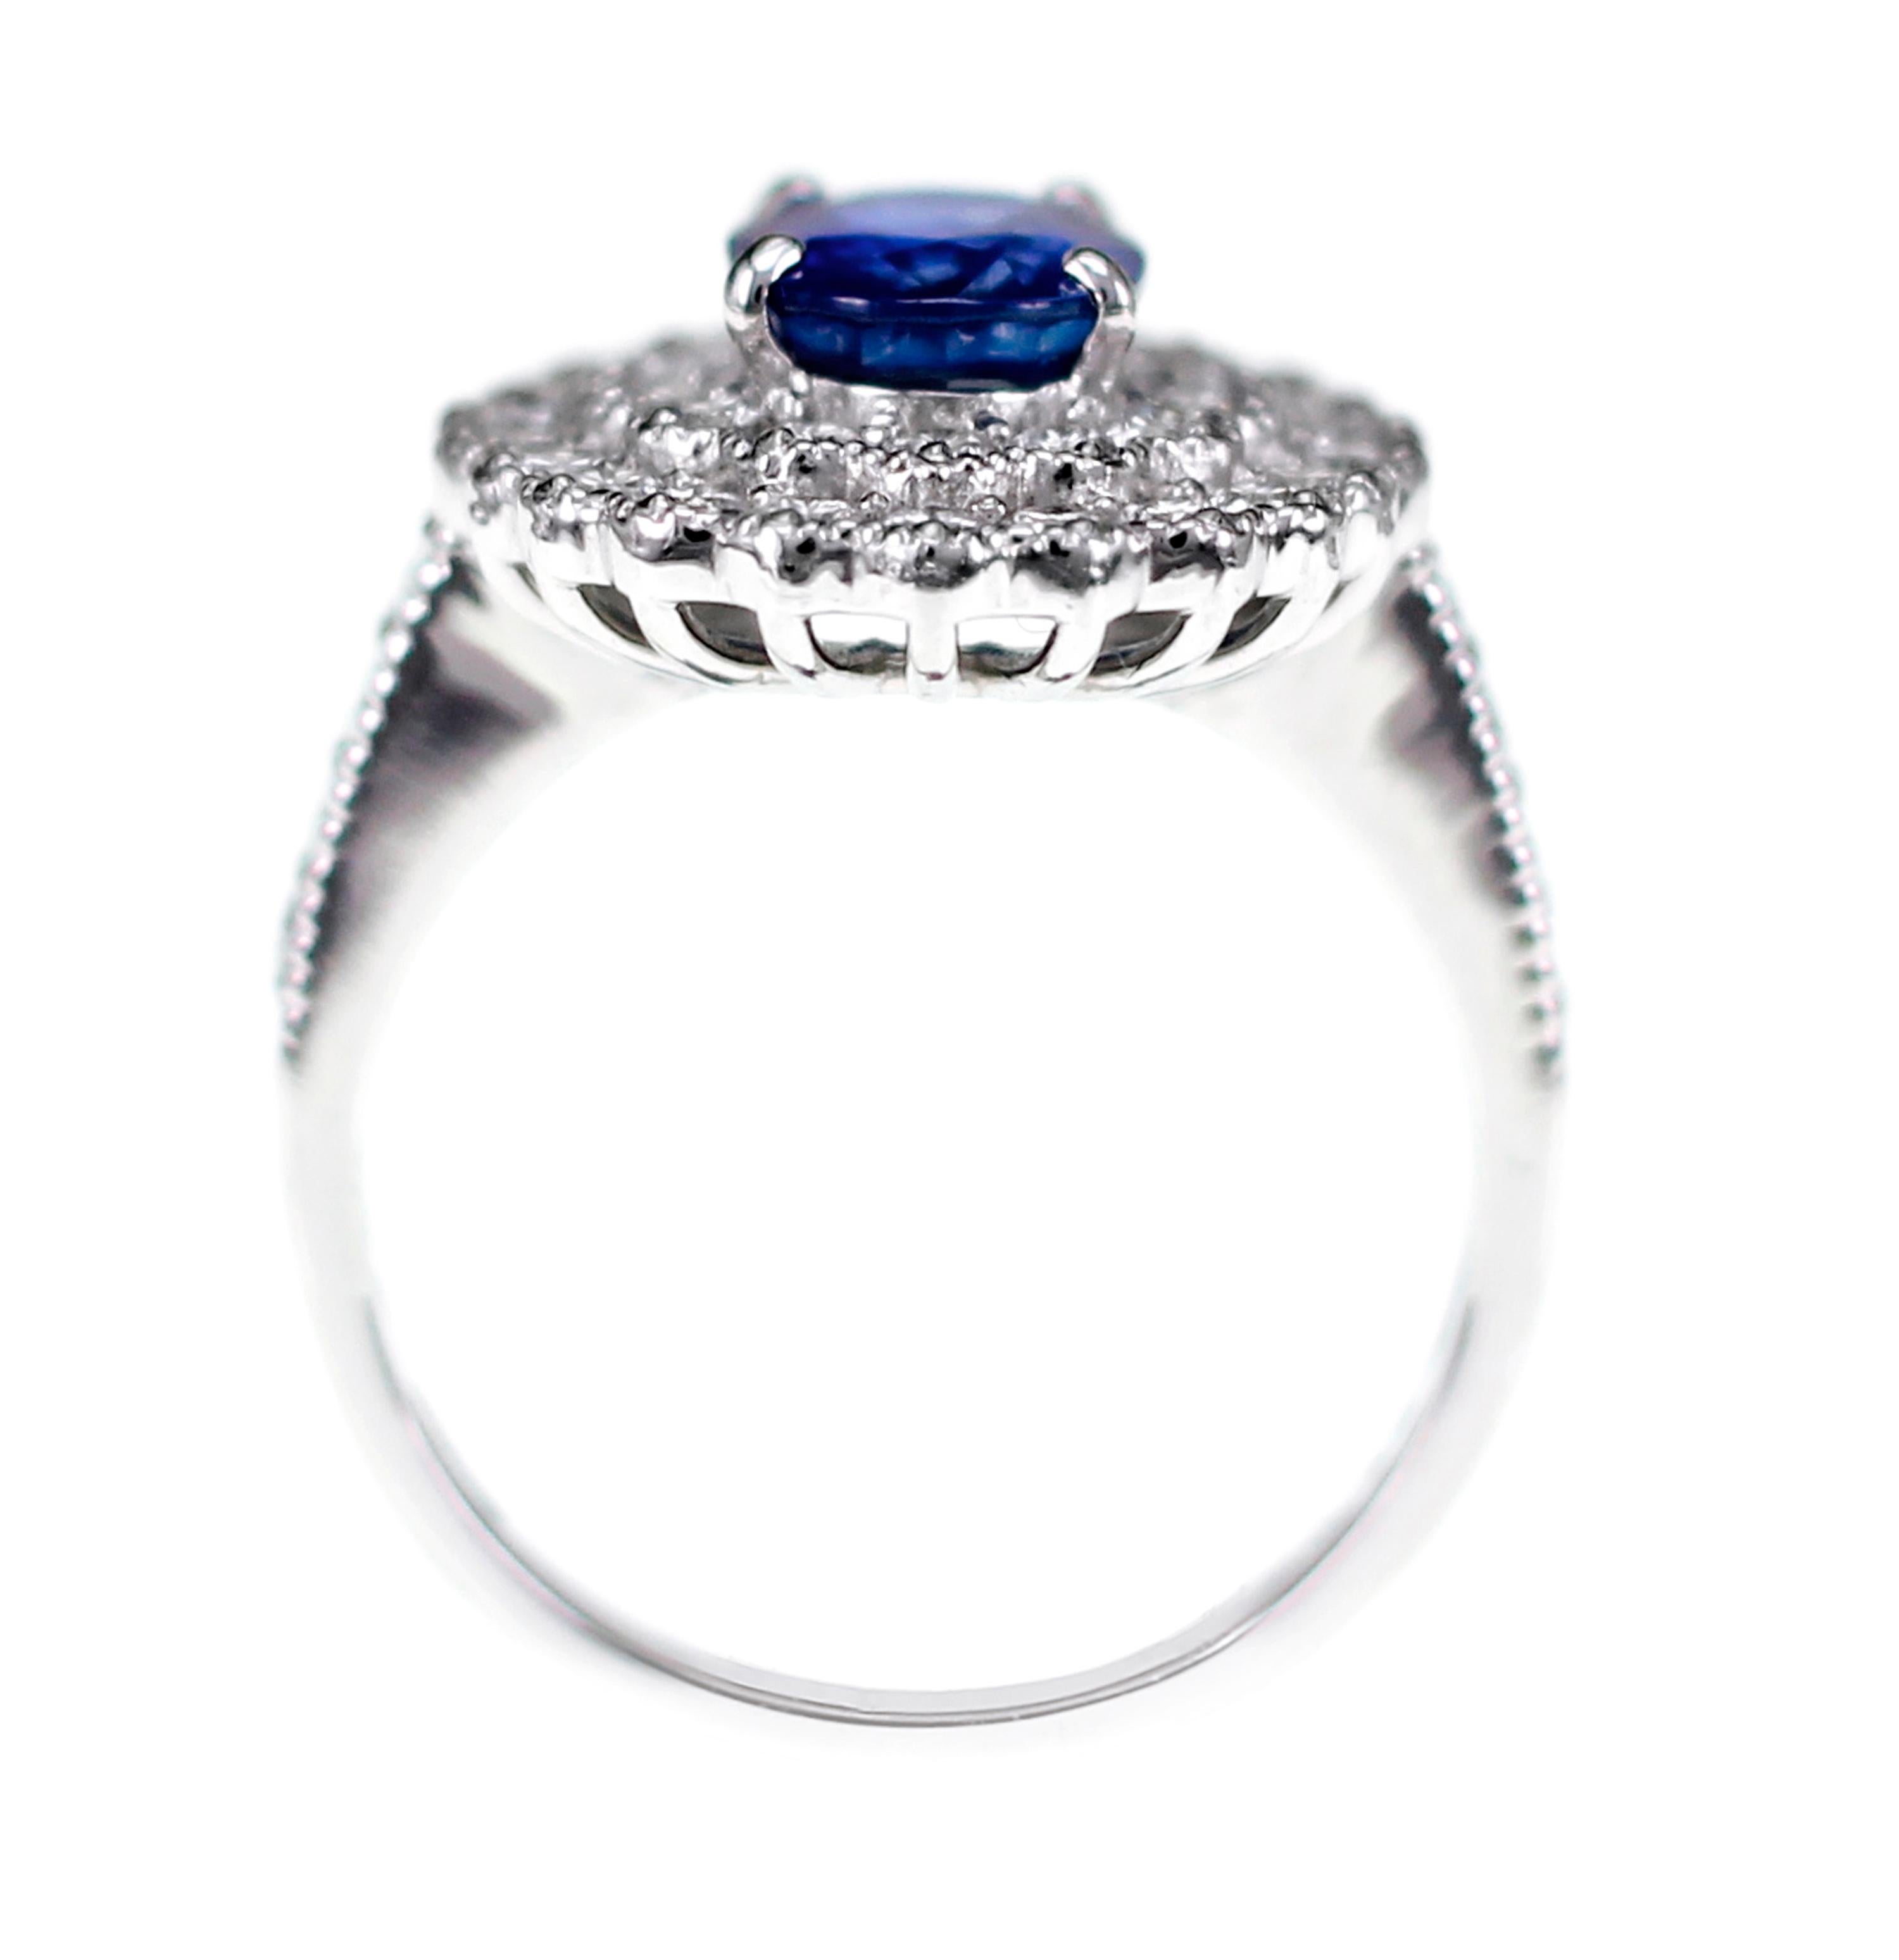 Classical Roman 2.10 Carat Japan Certified Natural Blue Sapphire Diamond Solitaire Ring